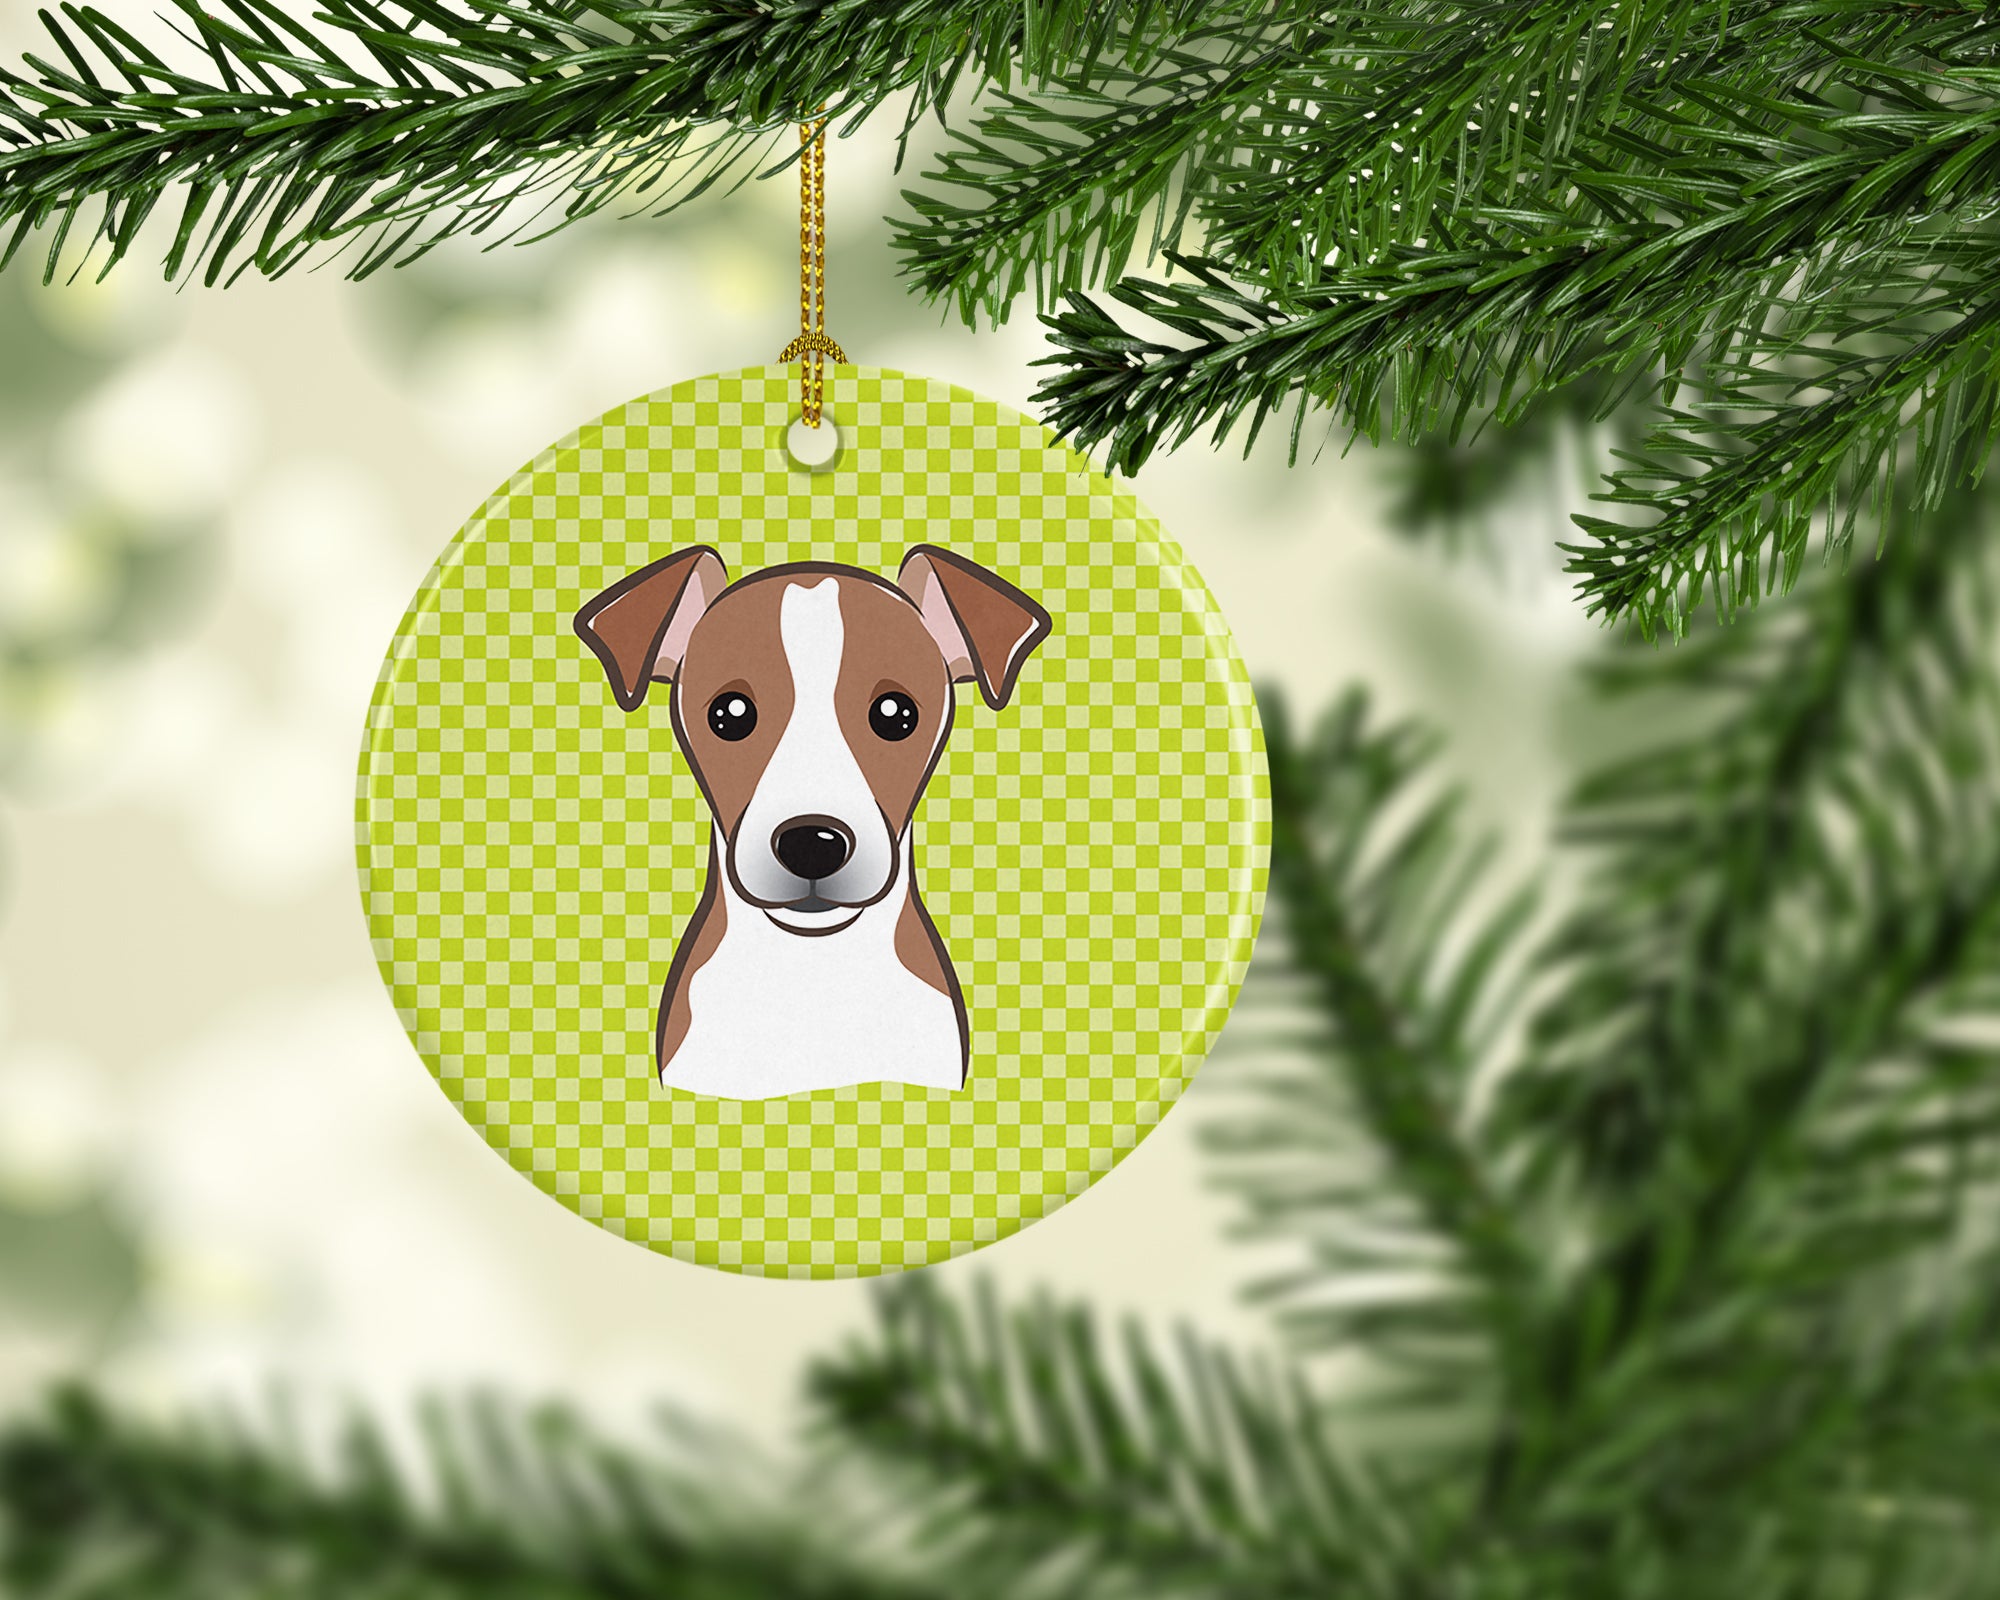 Checkerboard Lime Green Jack Russell Terrier Ceramic Ornament BB1322CO1 - the-store.com